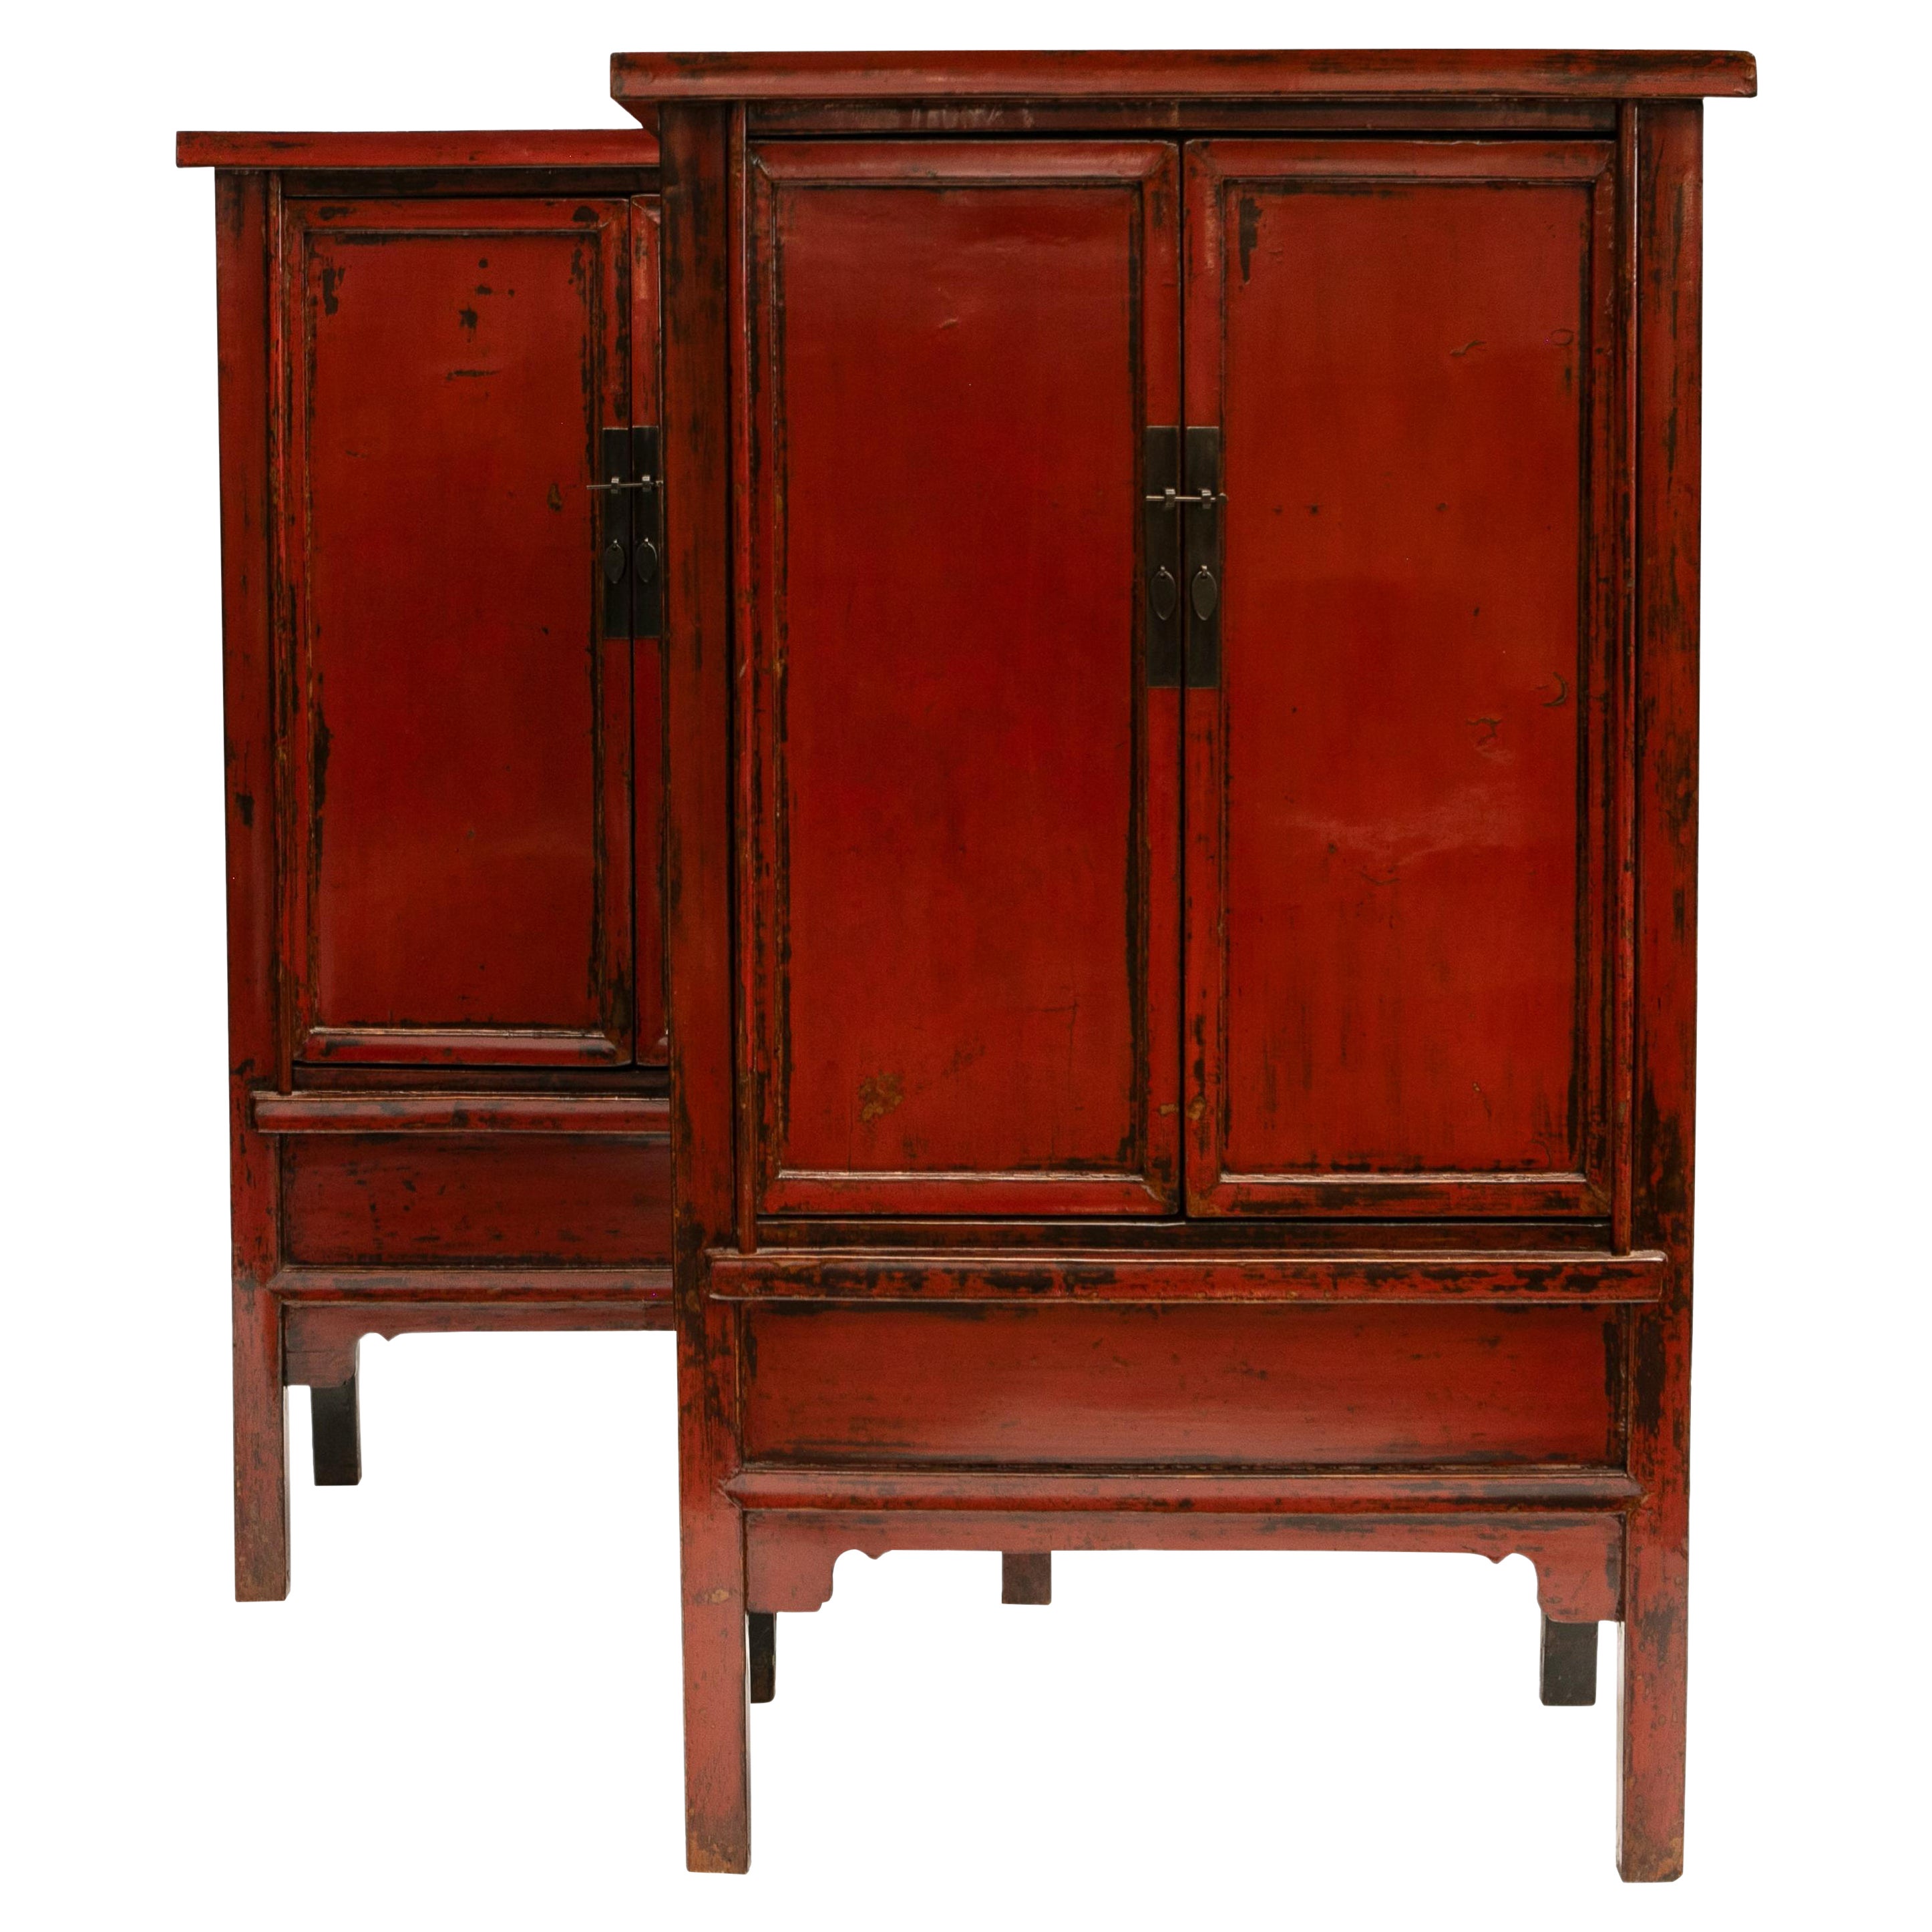 Pair of Chinese Red and Black Lacquer Cabinets